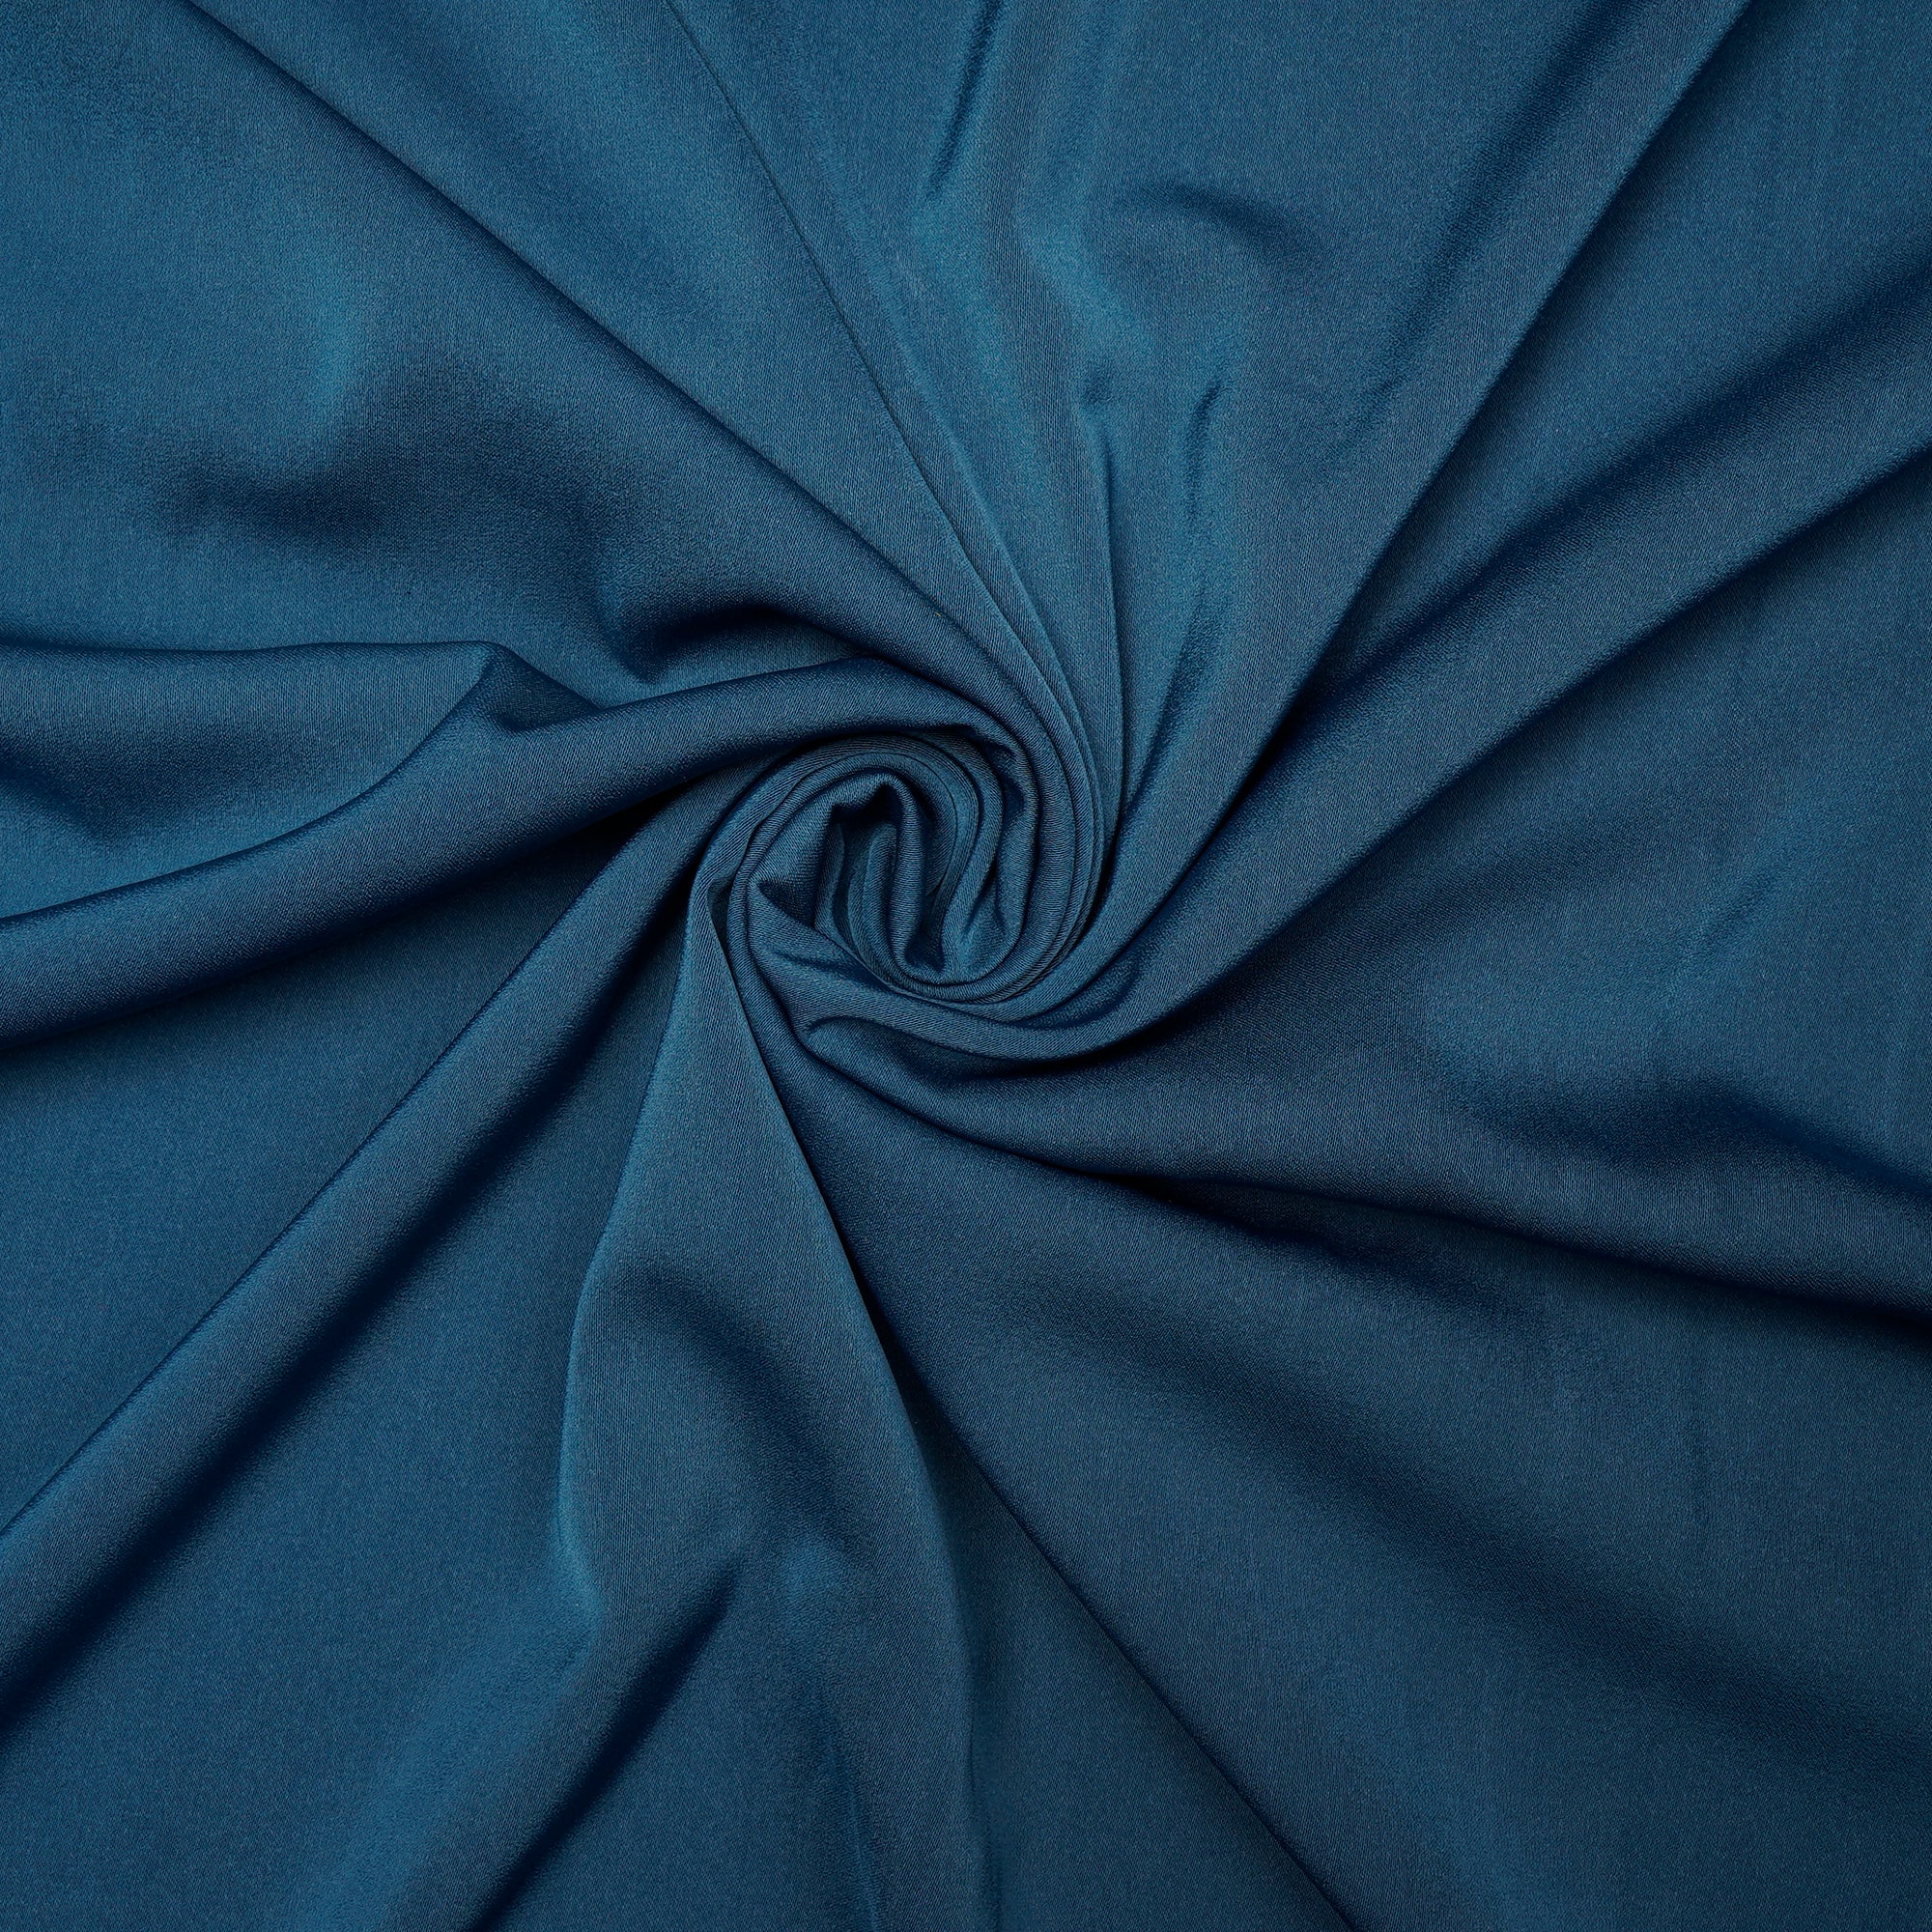 Biscay Bay Solid Dyed Imported Prada Crepe Fabric (60" Width)